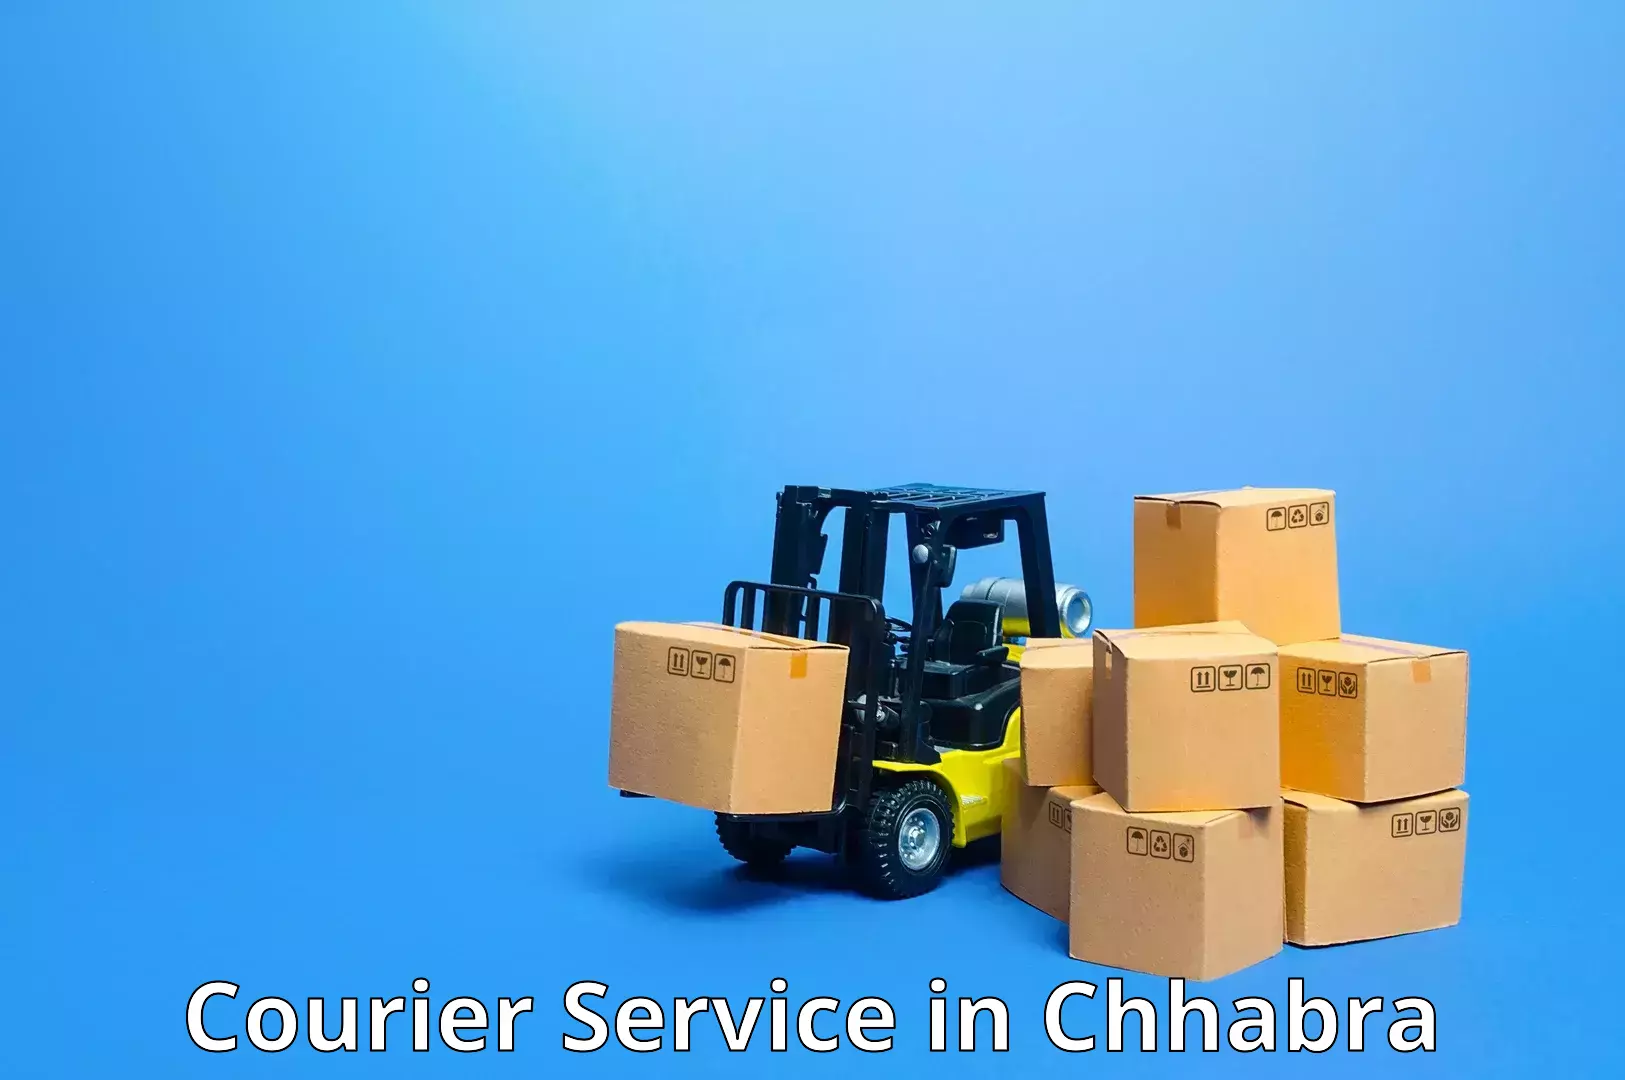 Global freight services in Chhabra